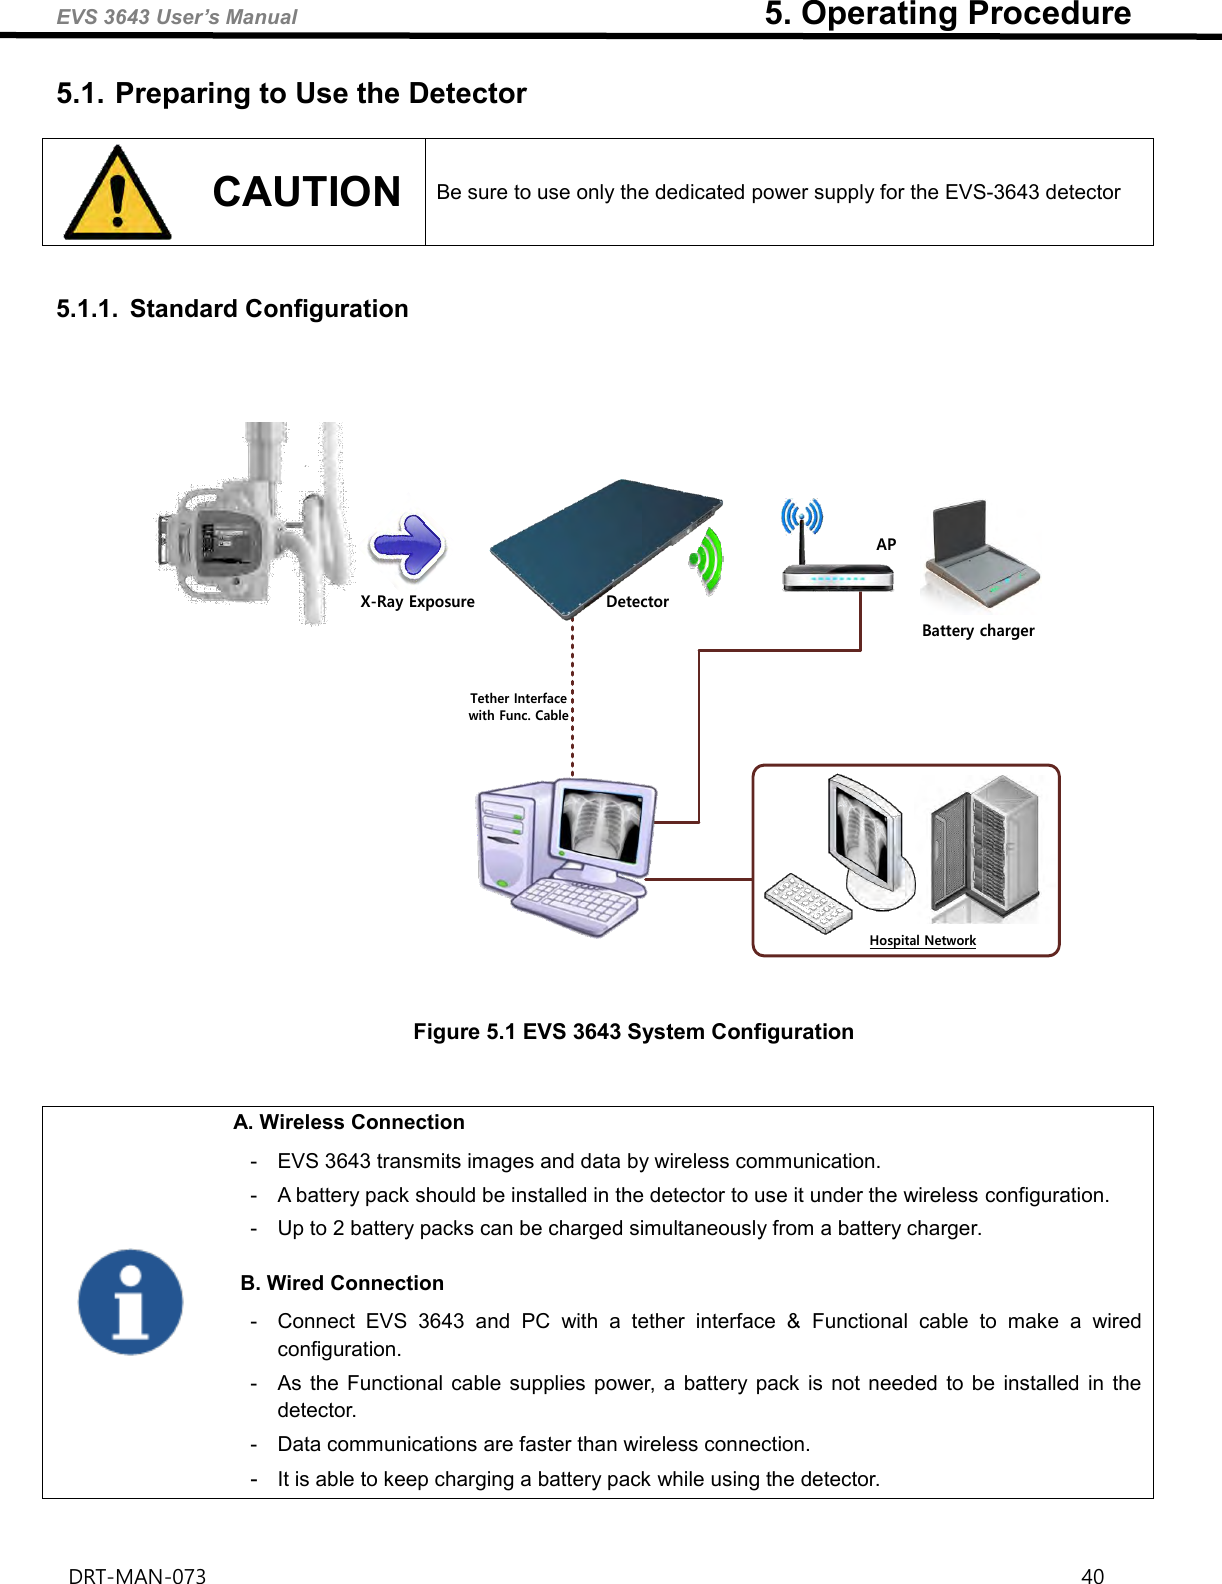 EVS 3643 User’s Manual                                                        5. Operating Procedure DRT-MAN-073                                                                                                                                                                40   5.1. Preparing to Use the Detector  CAUTION Be sure to use only the dedicated power supply for the EVS-3643 detector   5.1.1.  Standard Configuration    Hospital NetworkX-Ray ExposureBattery chargerAPDetectorTether Interface with Func. Cable  Figure 5.1 EVS 3643 System Configuration    A. Wireless Connection -  EVS 3643 transmits images and data by wireless communication.   -  A battery pack should be installed in the detector to use it under the wireless configuration.   -  Up to 2 battery packs can be charged simultaneously from a battery charger.    B. Wired Connection -  Connect  EVS  3643  and  PC  with  a  tether  interface  &amp;  Functional  cable  to  make  a  wired configuration.   -  As the Functional cable supplies power, a  battery pack is  not needed  to be  installed  in the detector. -  Data communications are faster than wireless connection.   -  It is able to keep charging a battery pack while using the detector.     